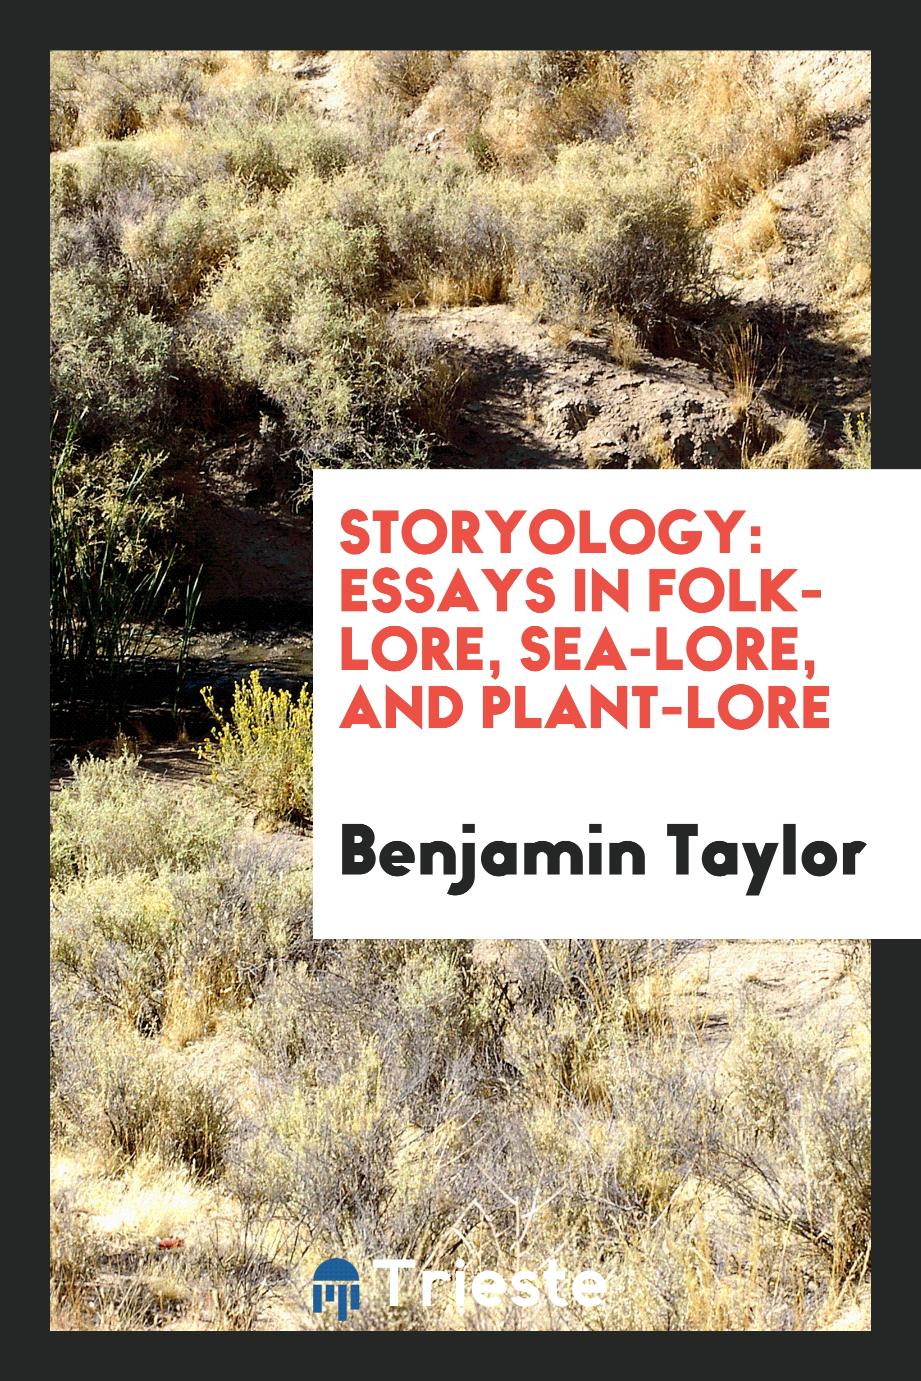 Storyology: essays in folk-lore, sea-lore, and plant-lore